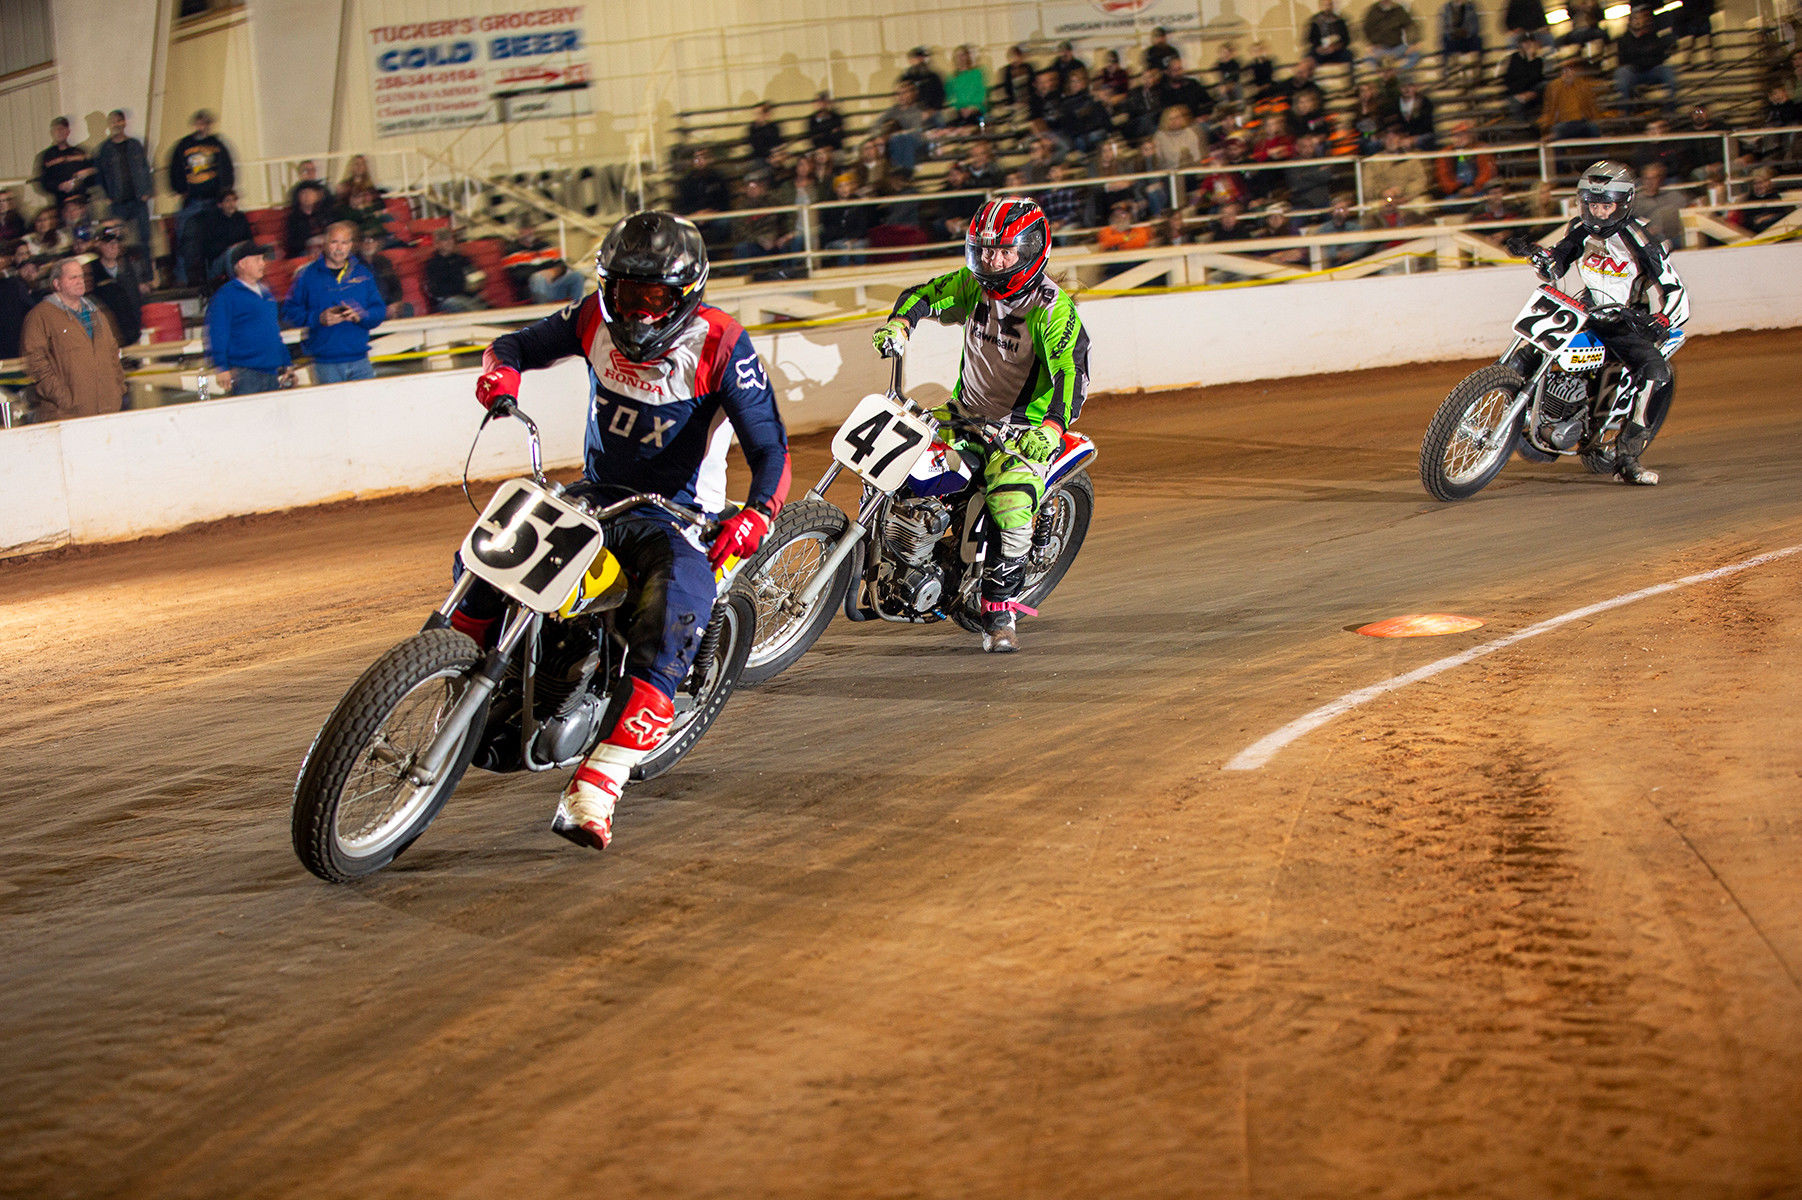 AHRMA dirt track racers in action at the Celebration Arena, in Priceville, Alabama. Photo by Kevin McIntosh, courtesy AHRMA.